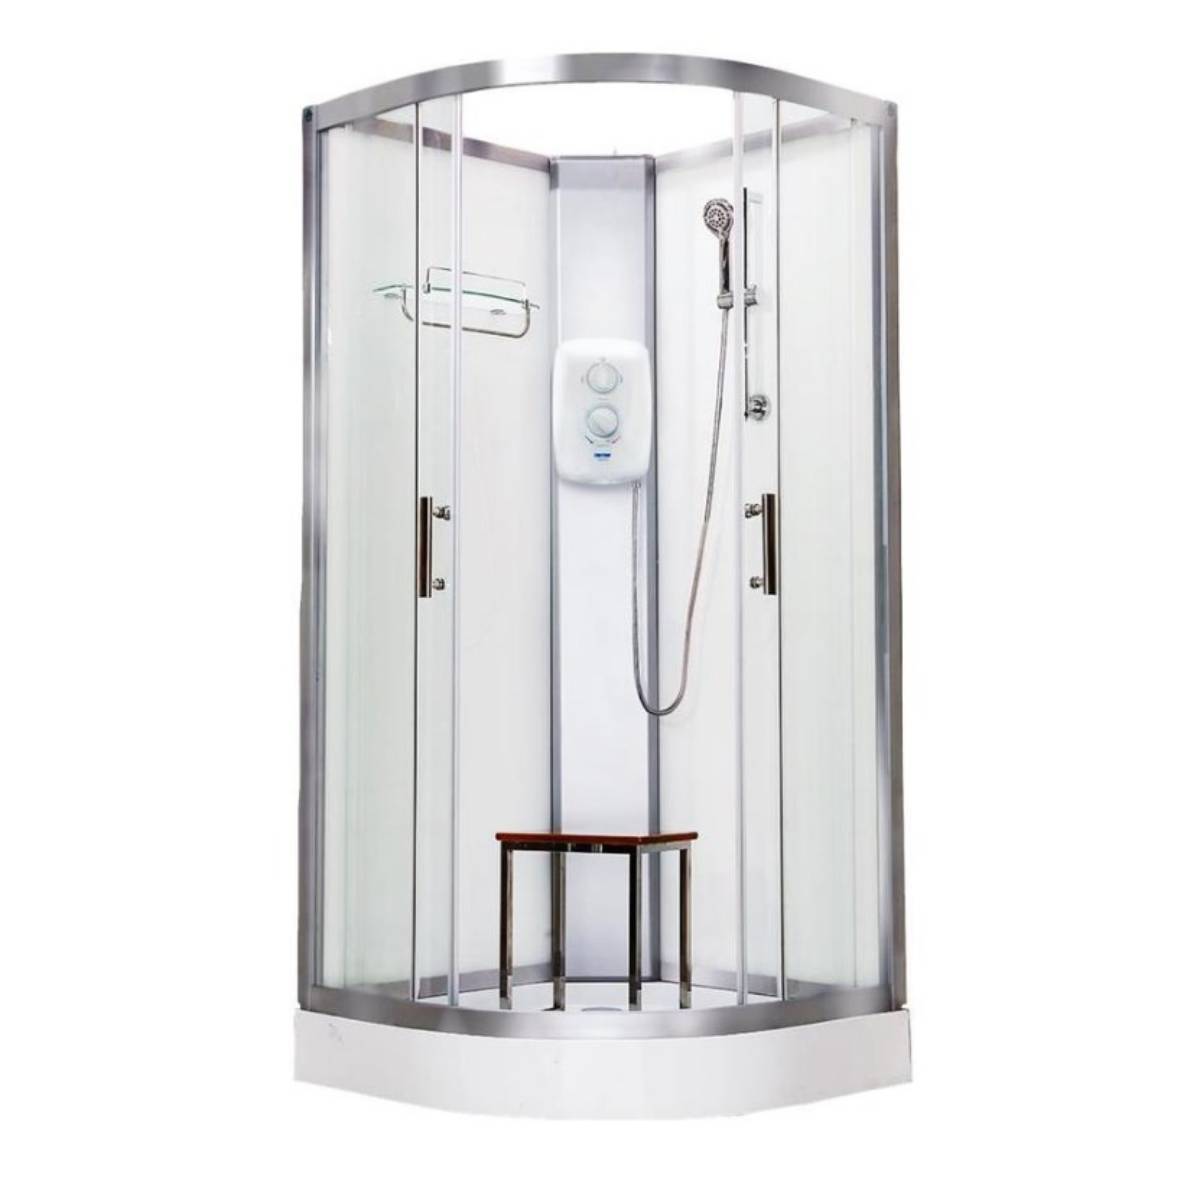 Vidalux Pure Electric 900mm Shower Cabin White - Standard 9.5KW (11655)